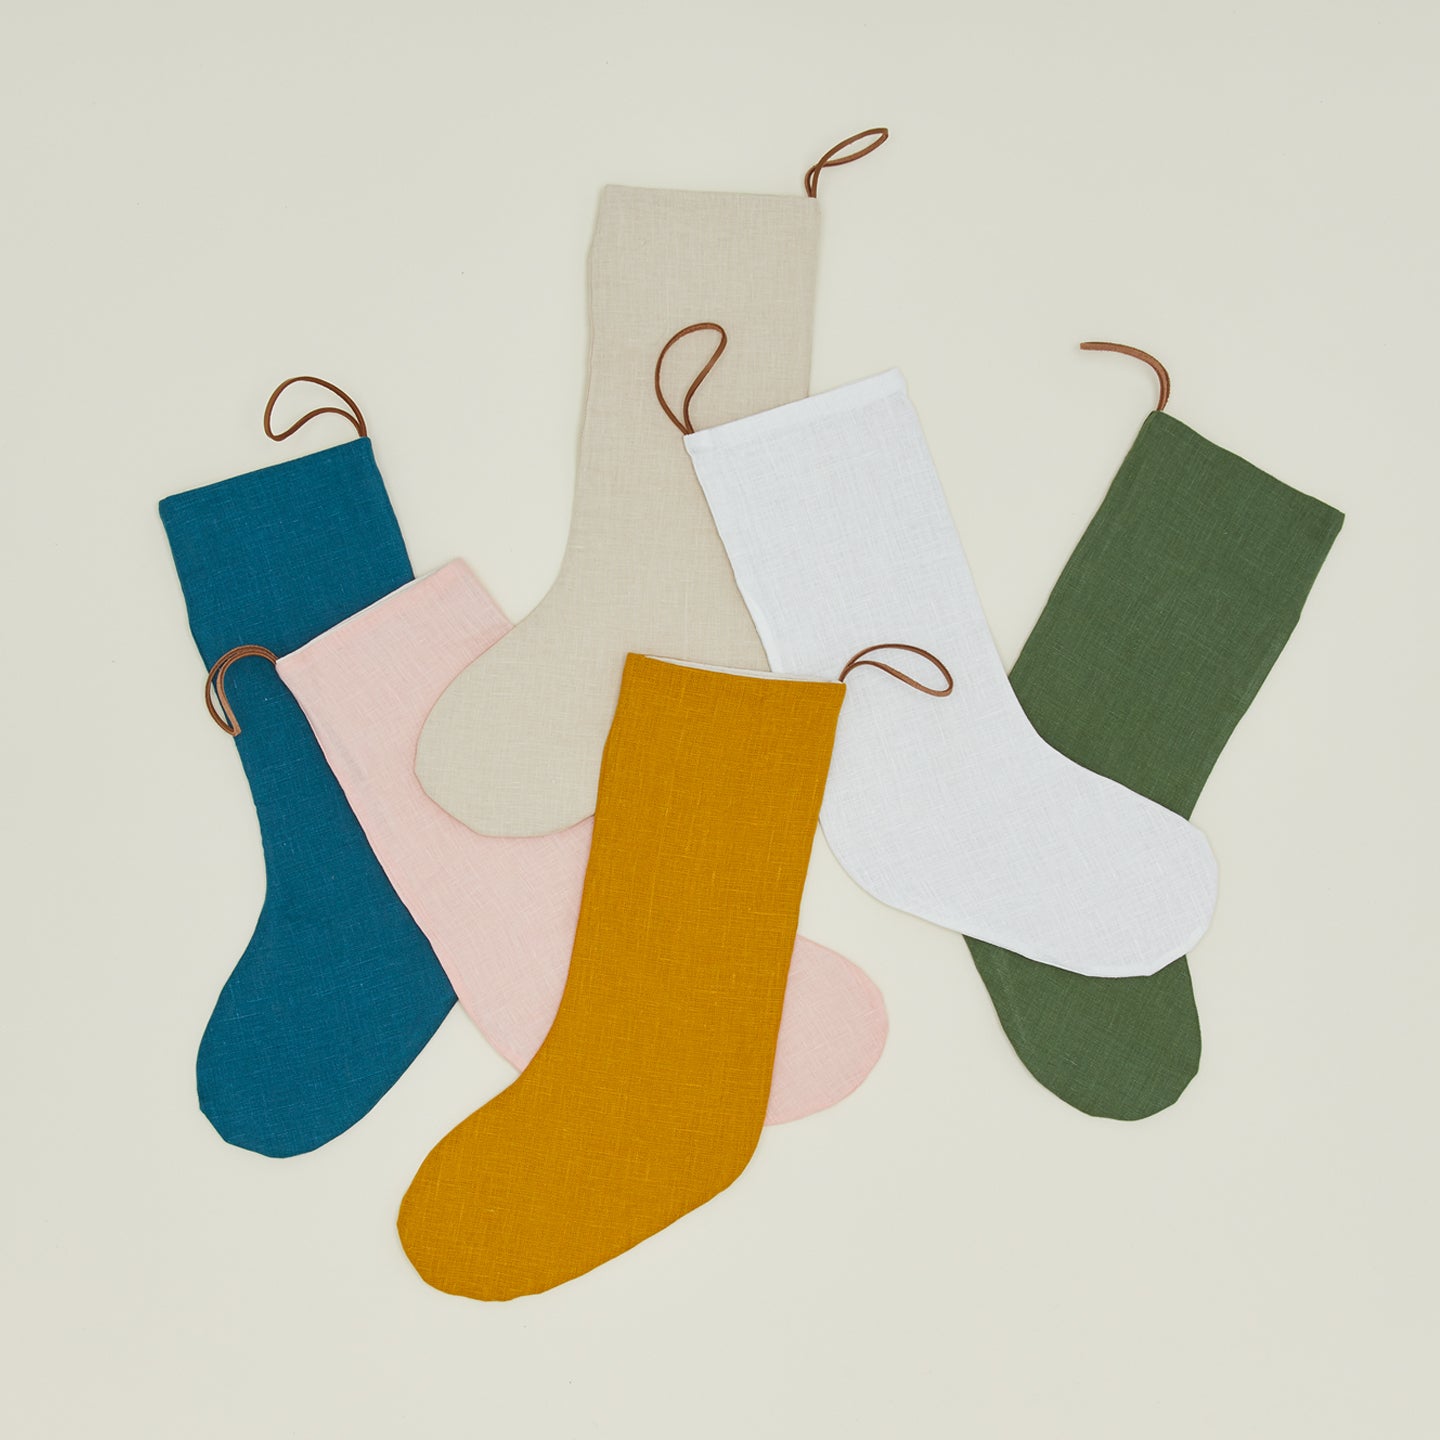 Simple Linen Stocking - Flax